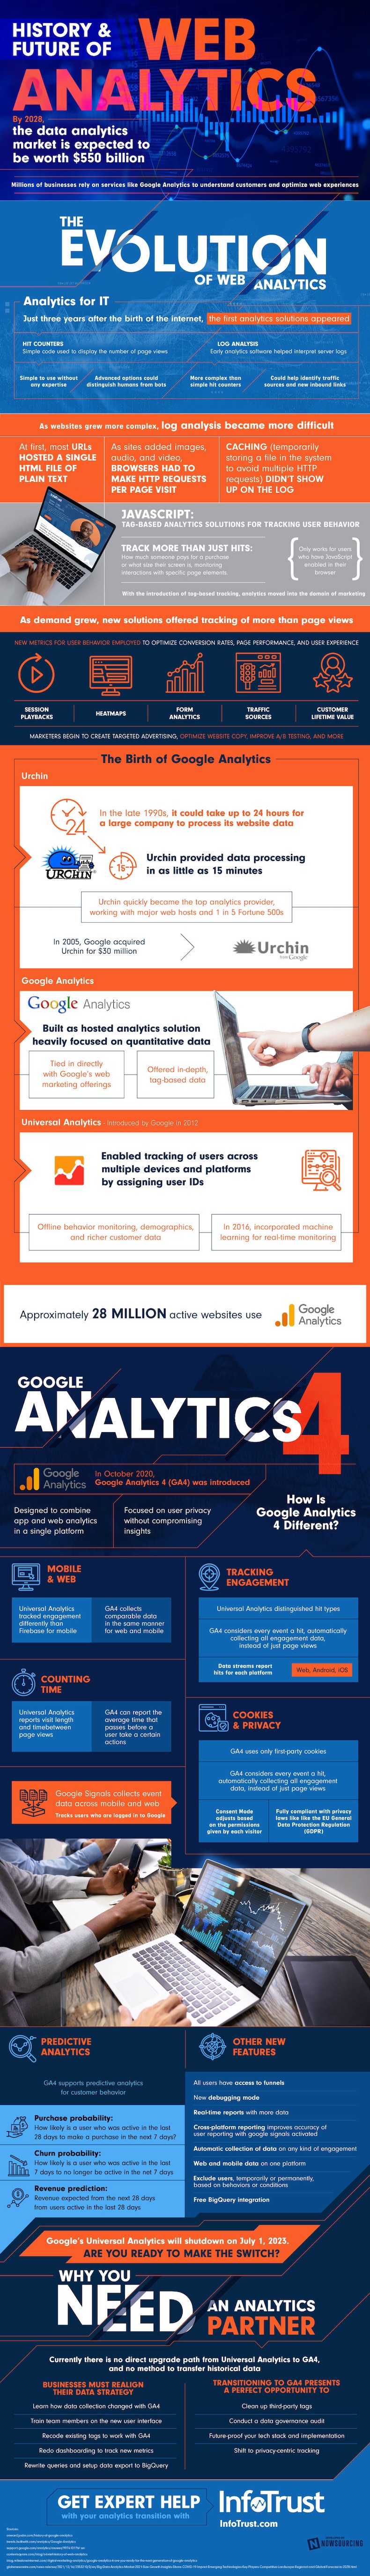 History and future of web analytics infographic